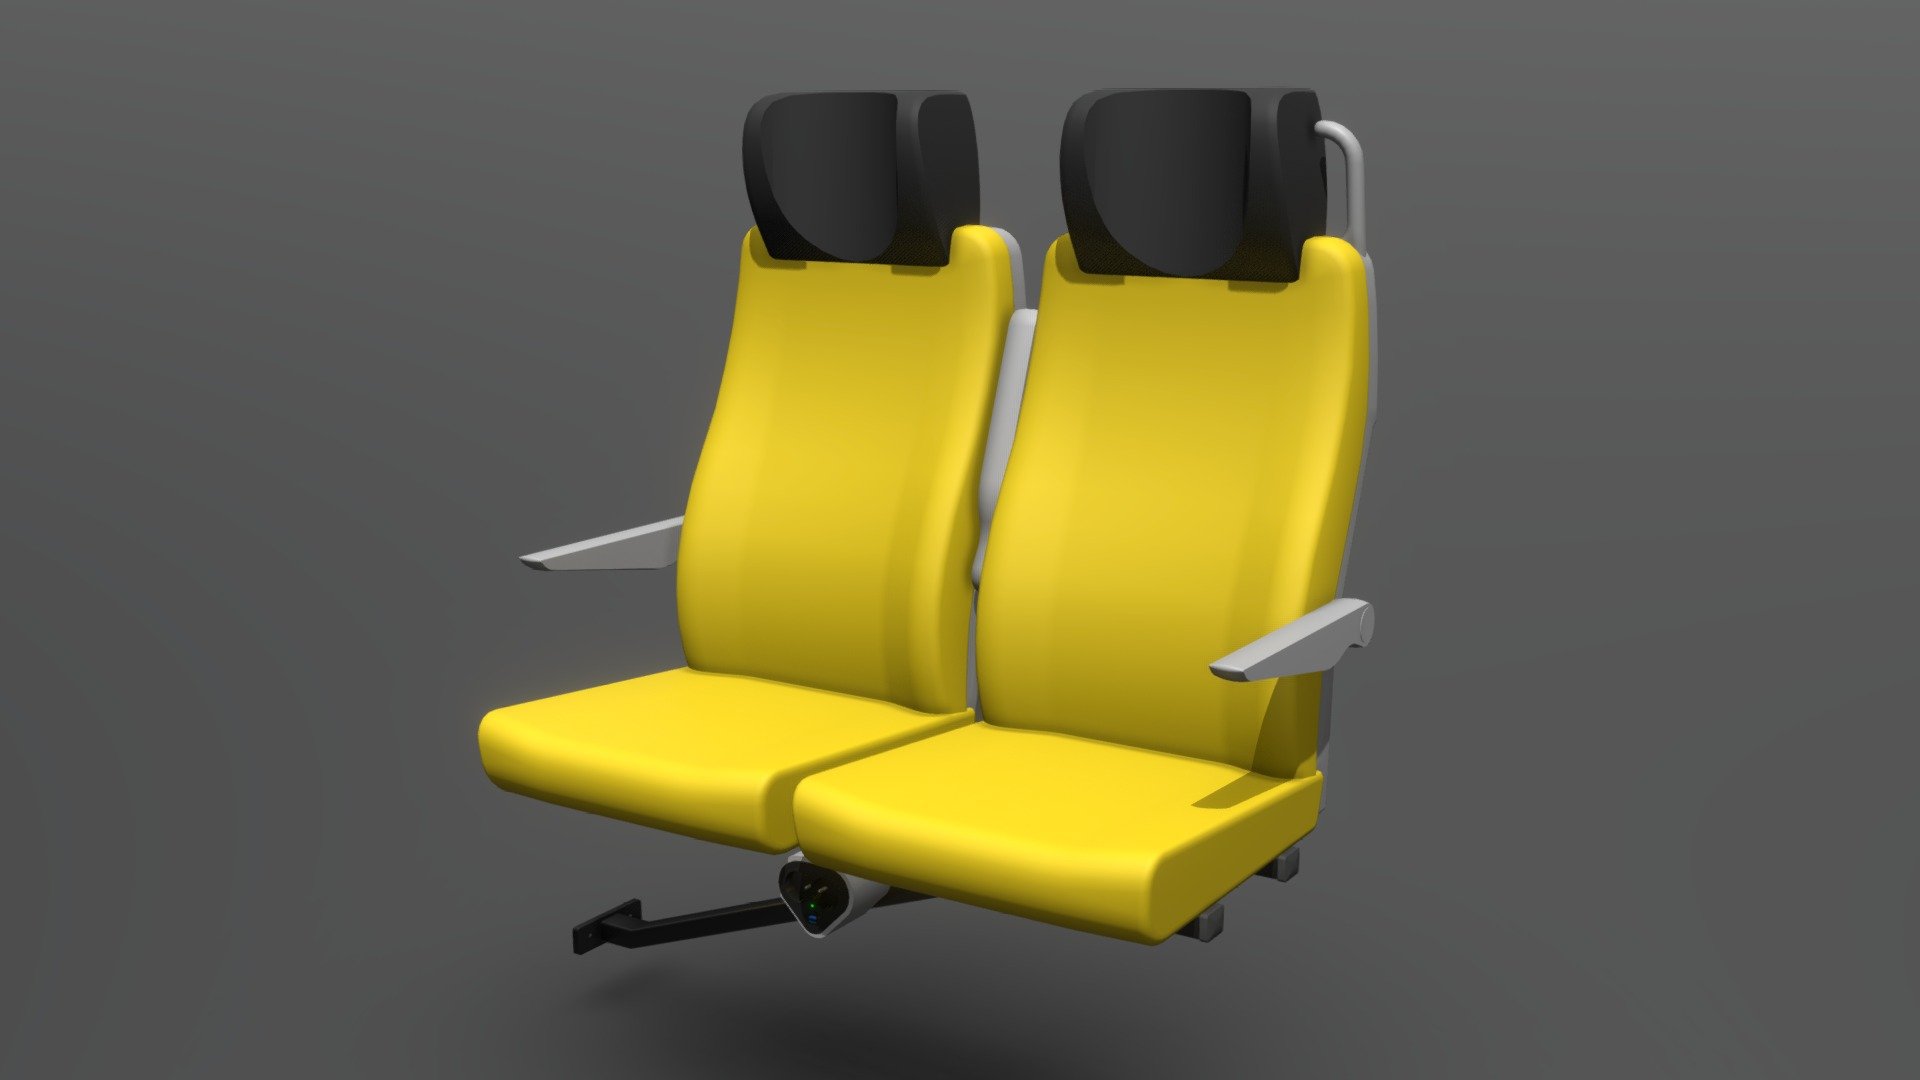 Original design of railway seats. Modular structure, ergonomic and lightweight construction allow the interior of a single-space railway vehicle to be freely arranged, while maintaining the optimal weight of the whole vehicle 3d model